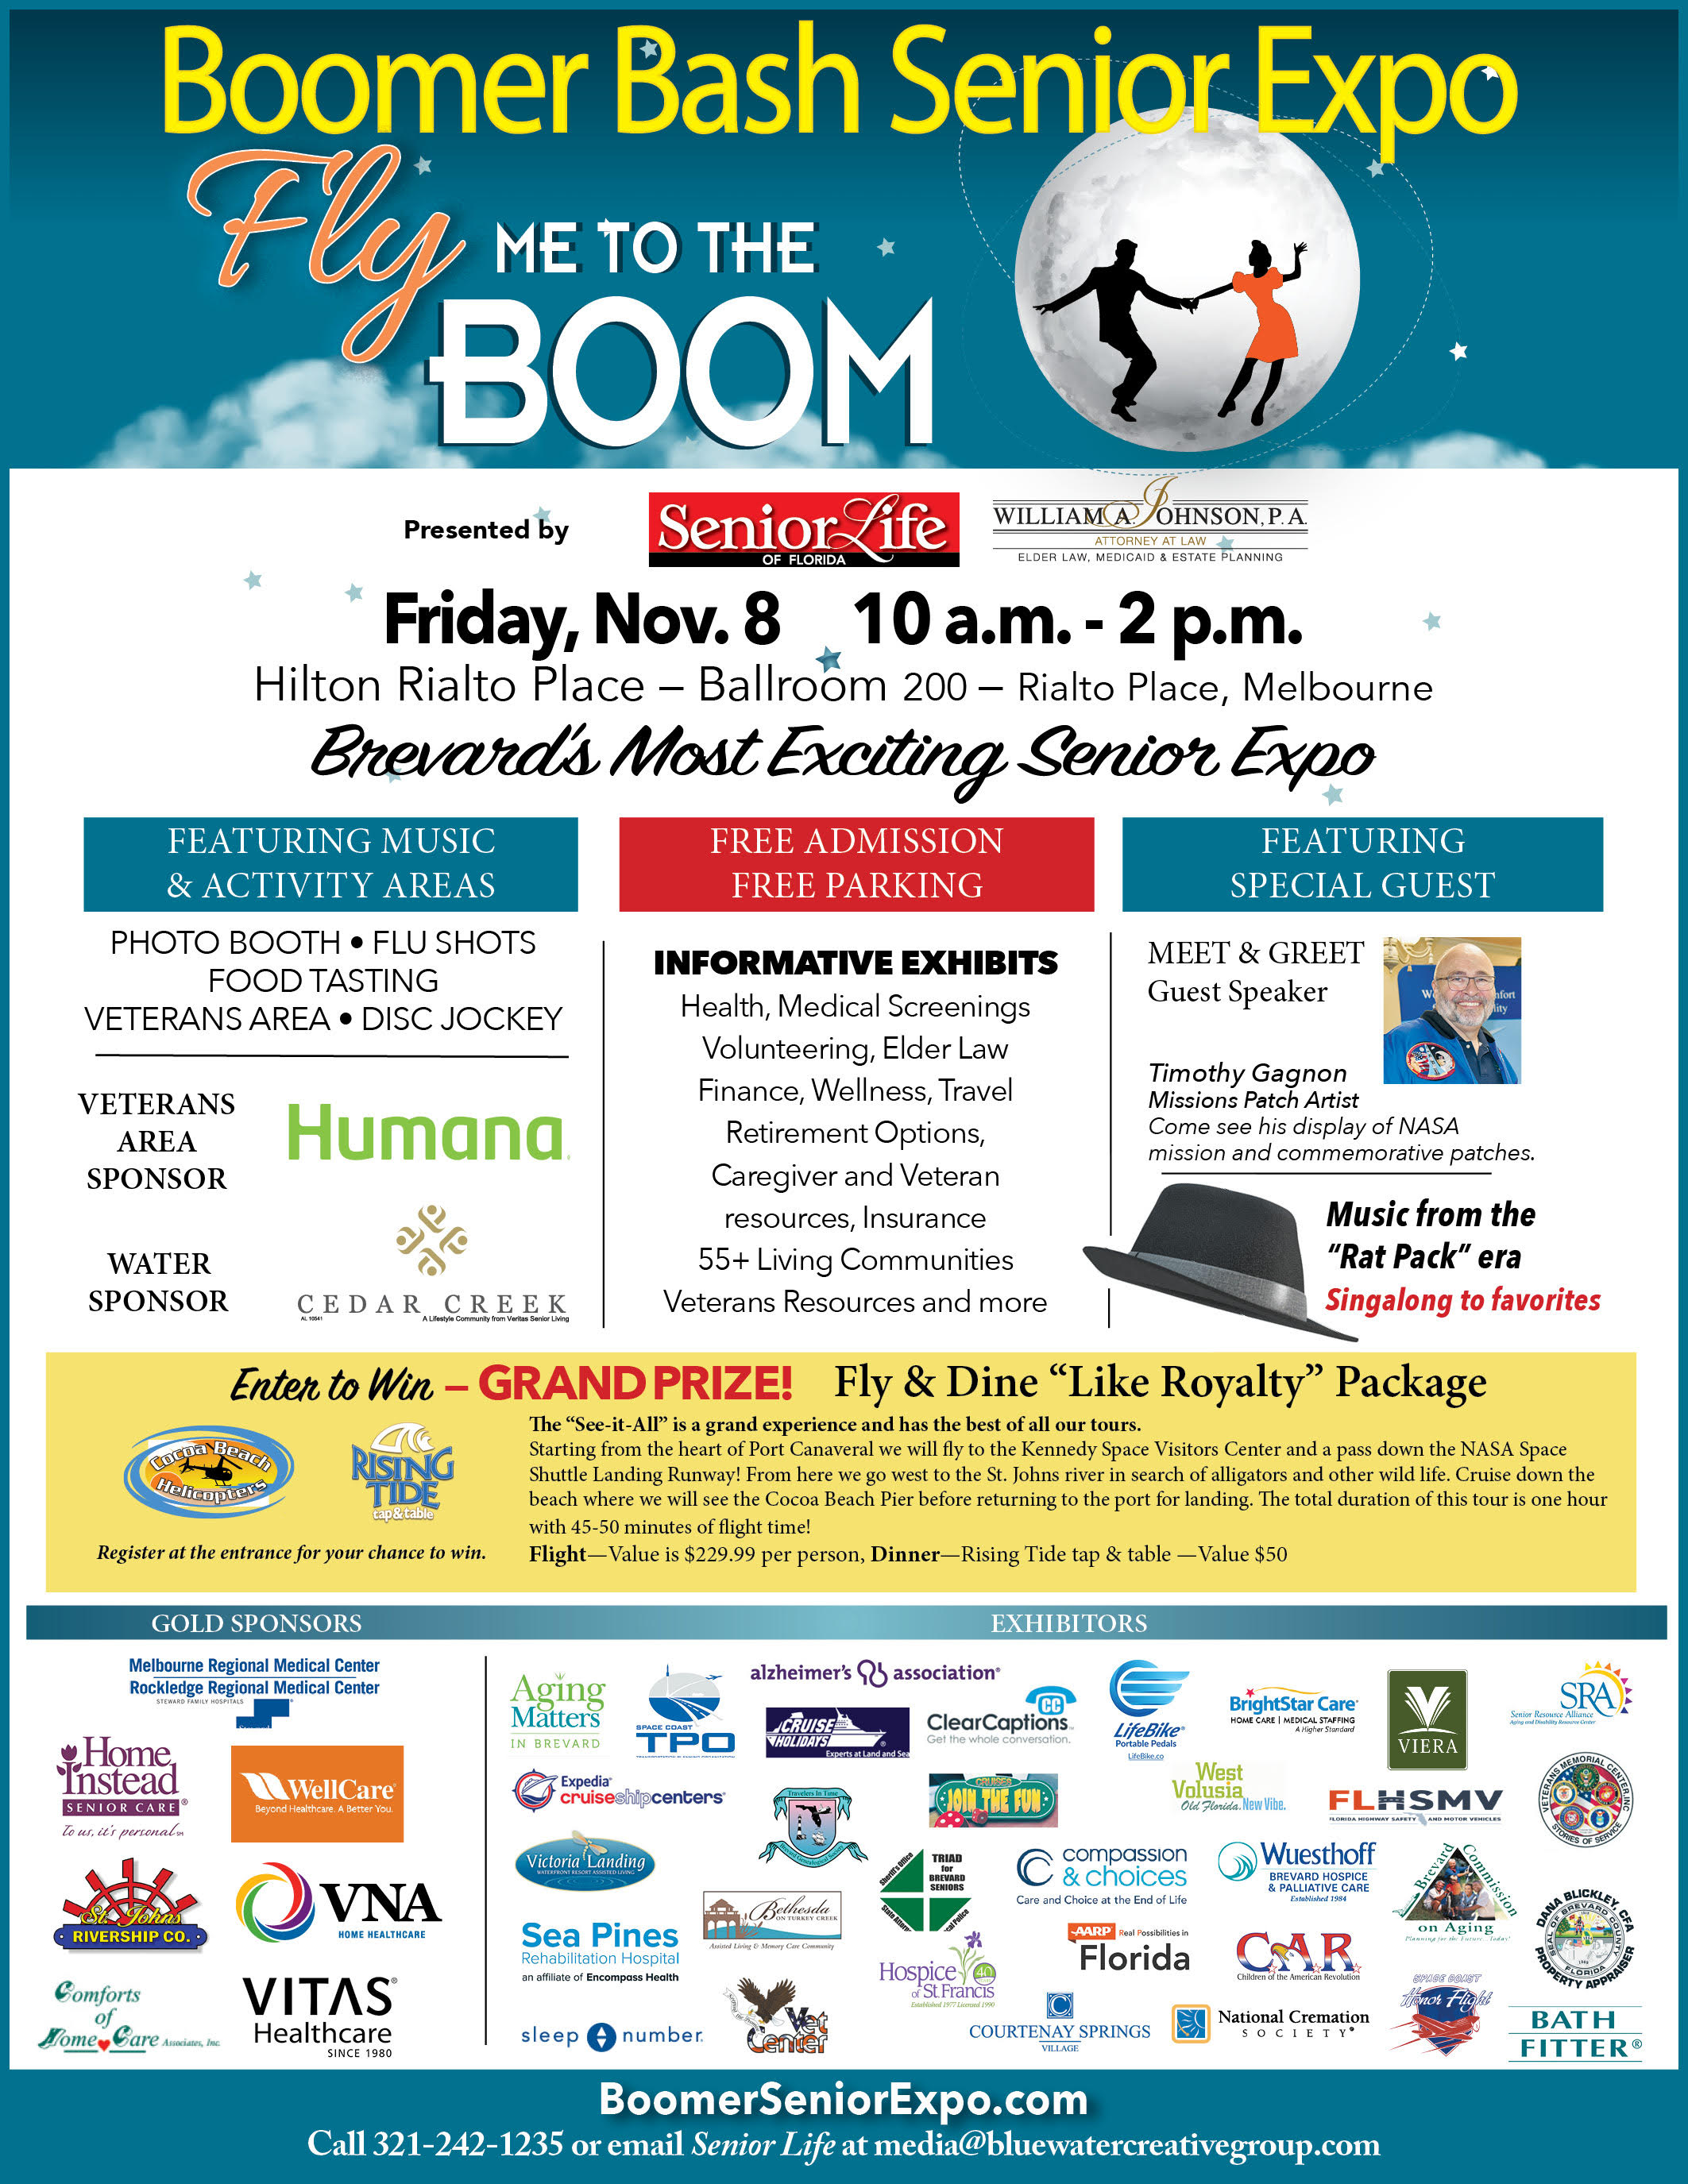 Boomer Bash Senior Expo - Fly Me To The Boom